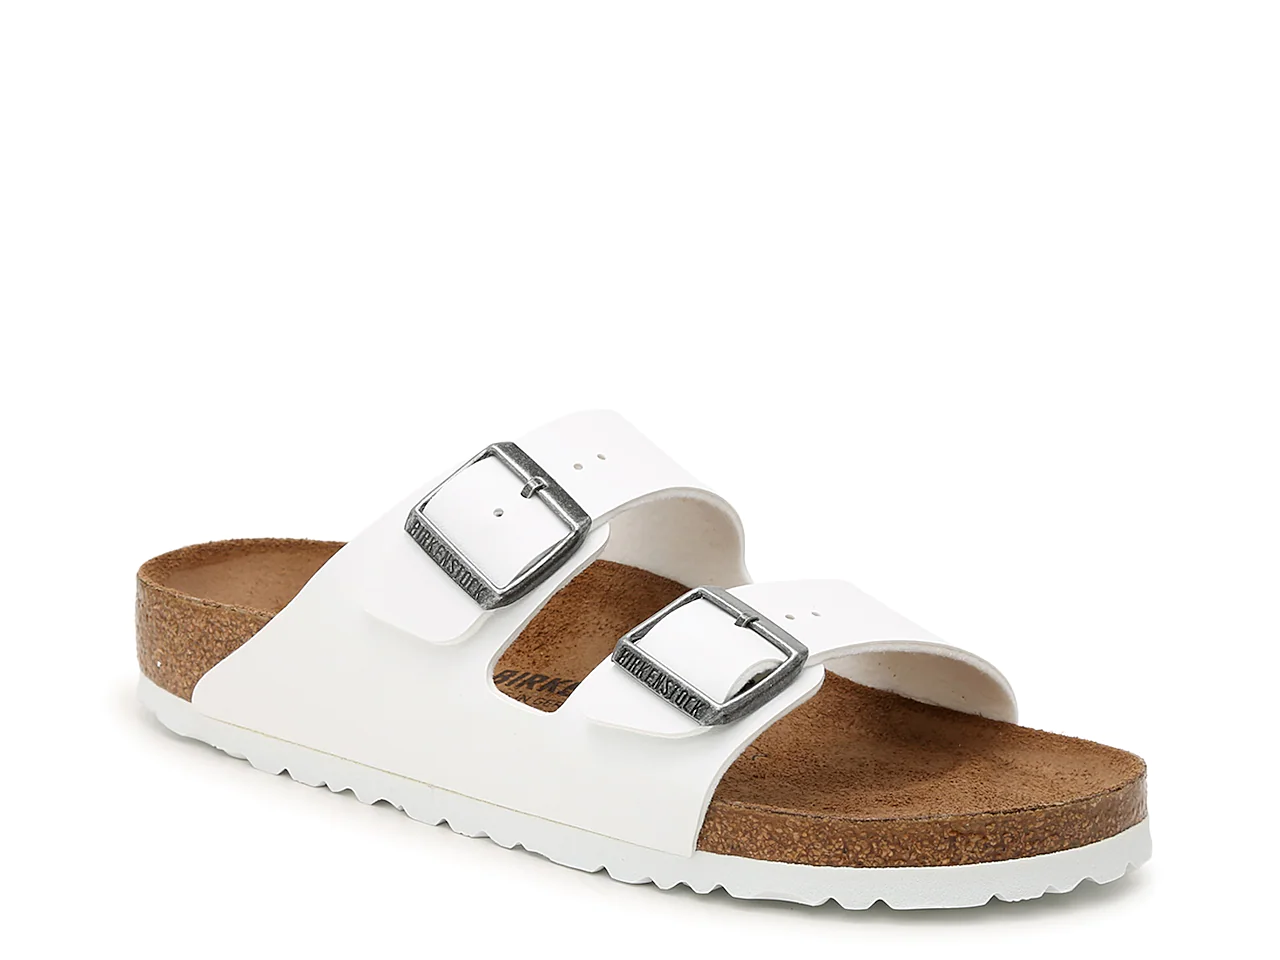 A Birkenstock sandal with clasps